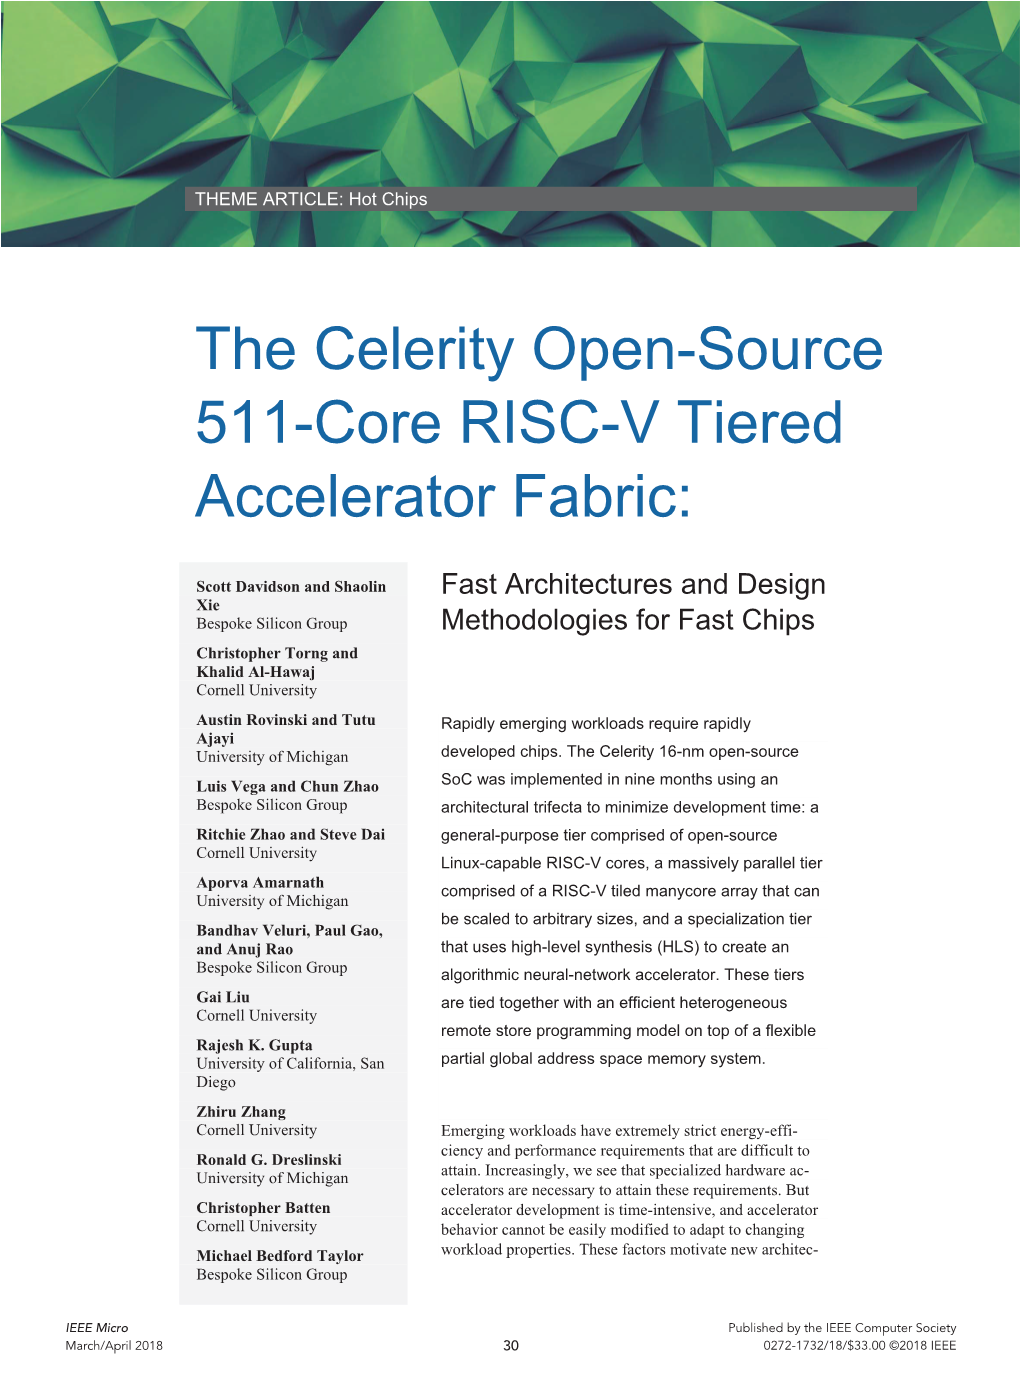 The Celerity Open-Source 511-Core RISC-V Tiered Accelerator Fabric